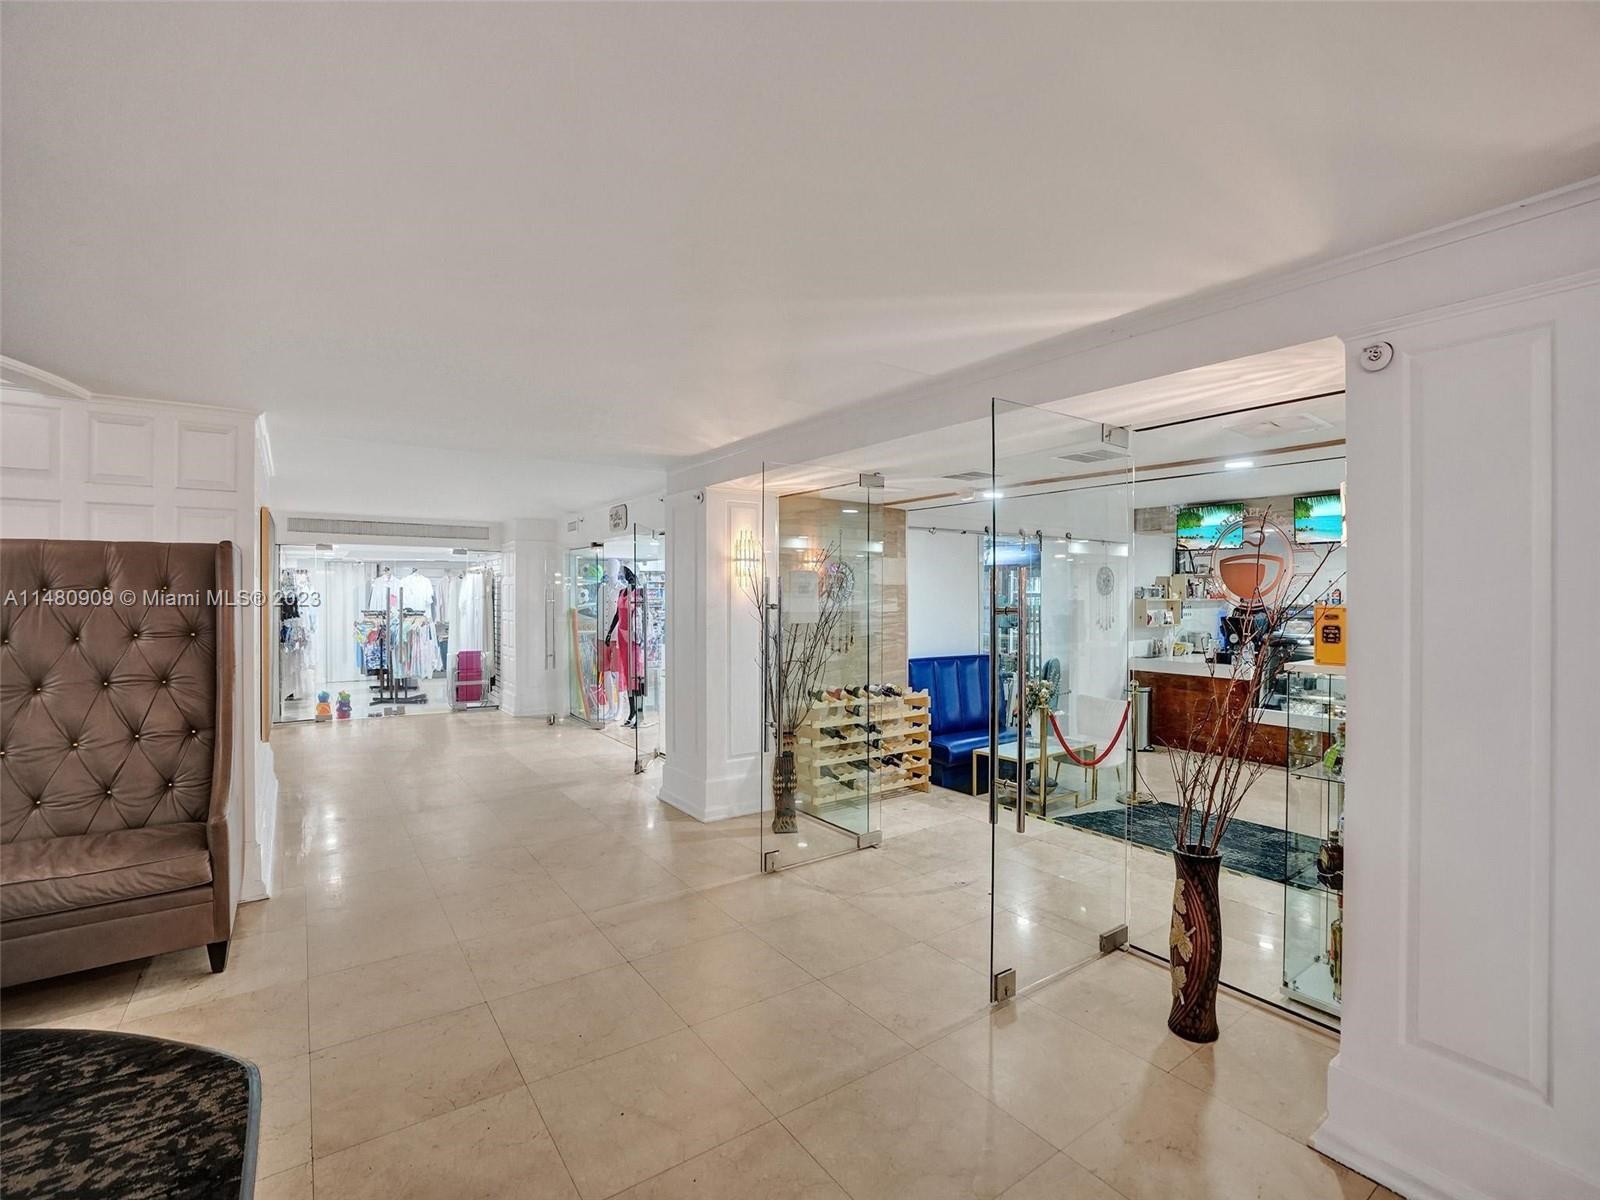 31. 5225 Collins Ave